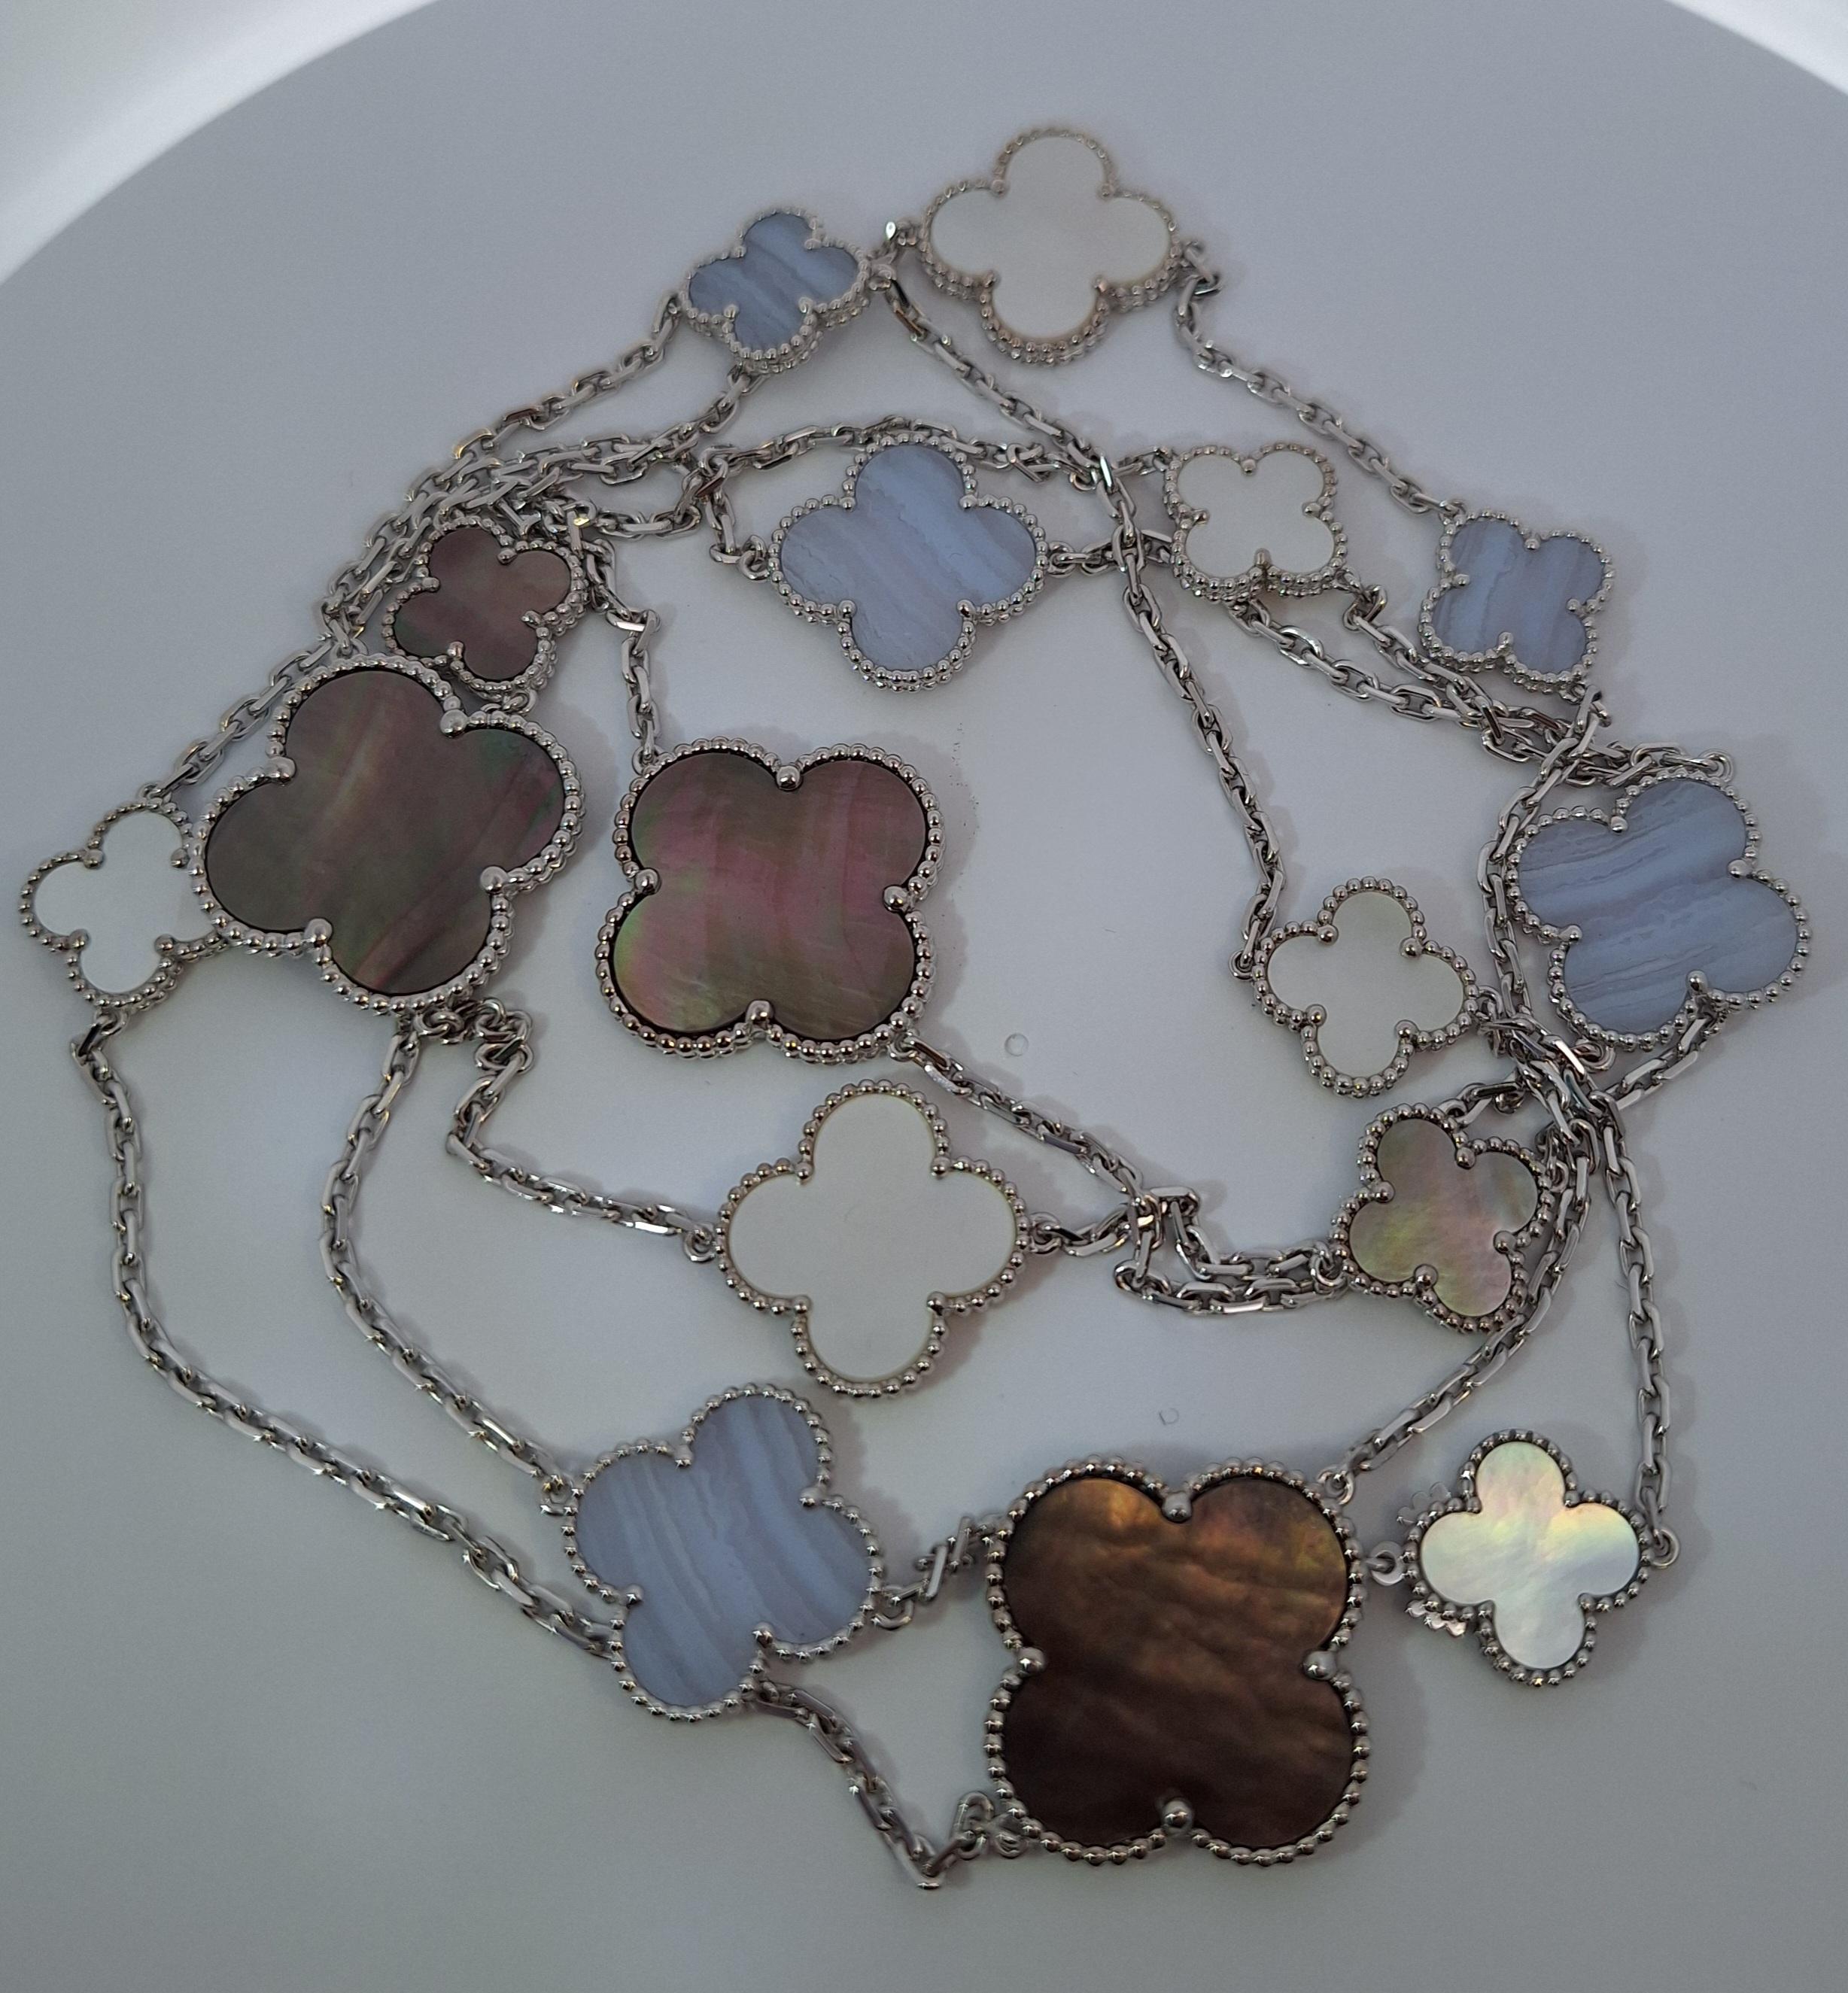 Stone: Natural Mother of Pearl & Chalcedony

16 Different Sized Alhambra Motifs

Metal: 18K White Gold 

Length: 24